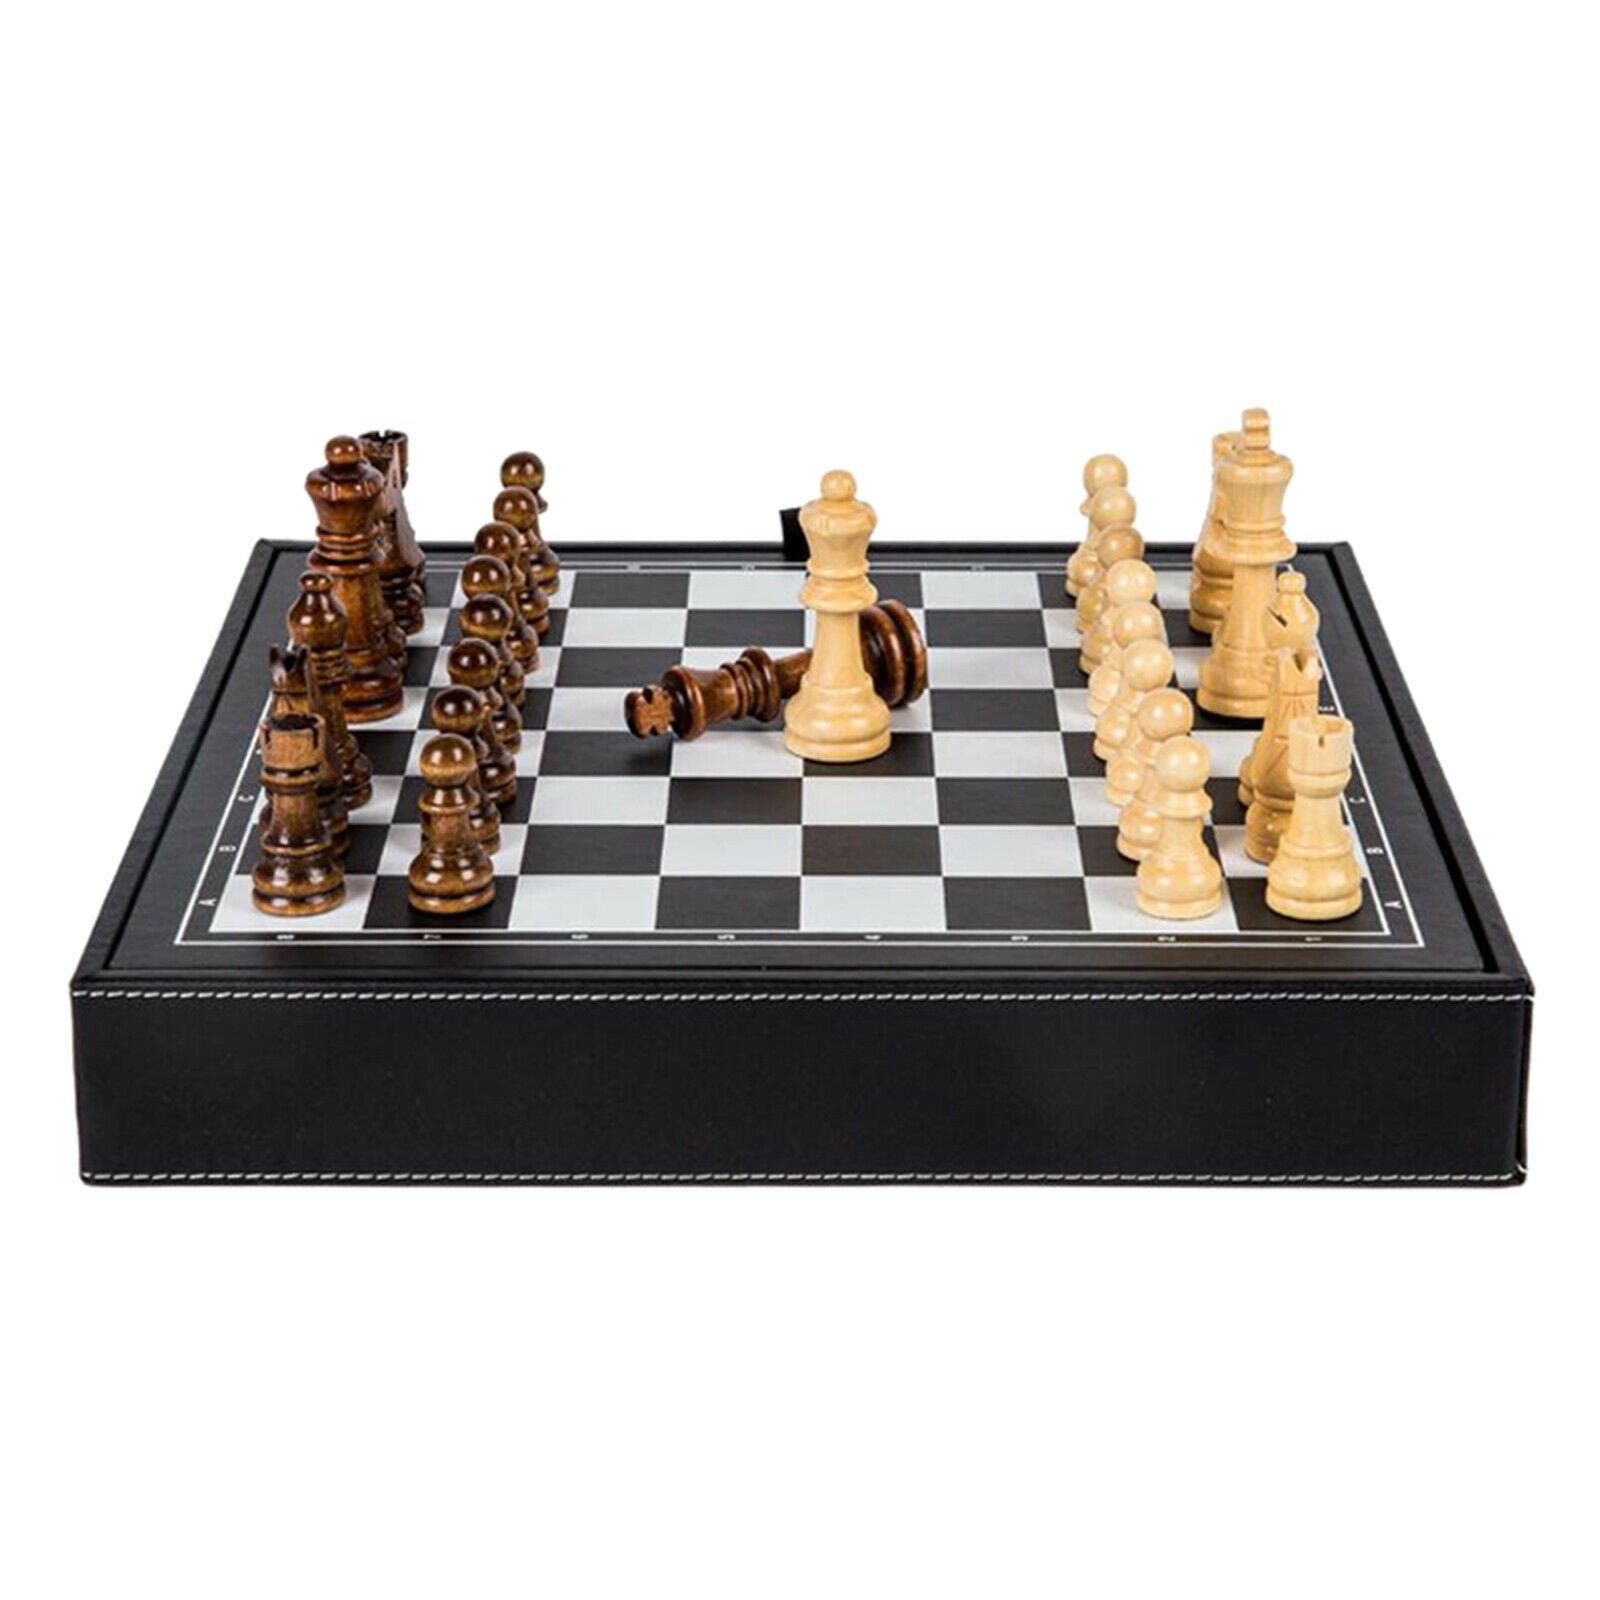 Retro Chess Set for Kids and Adults Classic Family Chess Board Game with Wooden